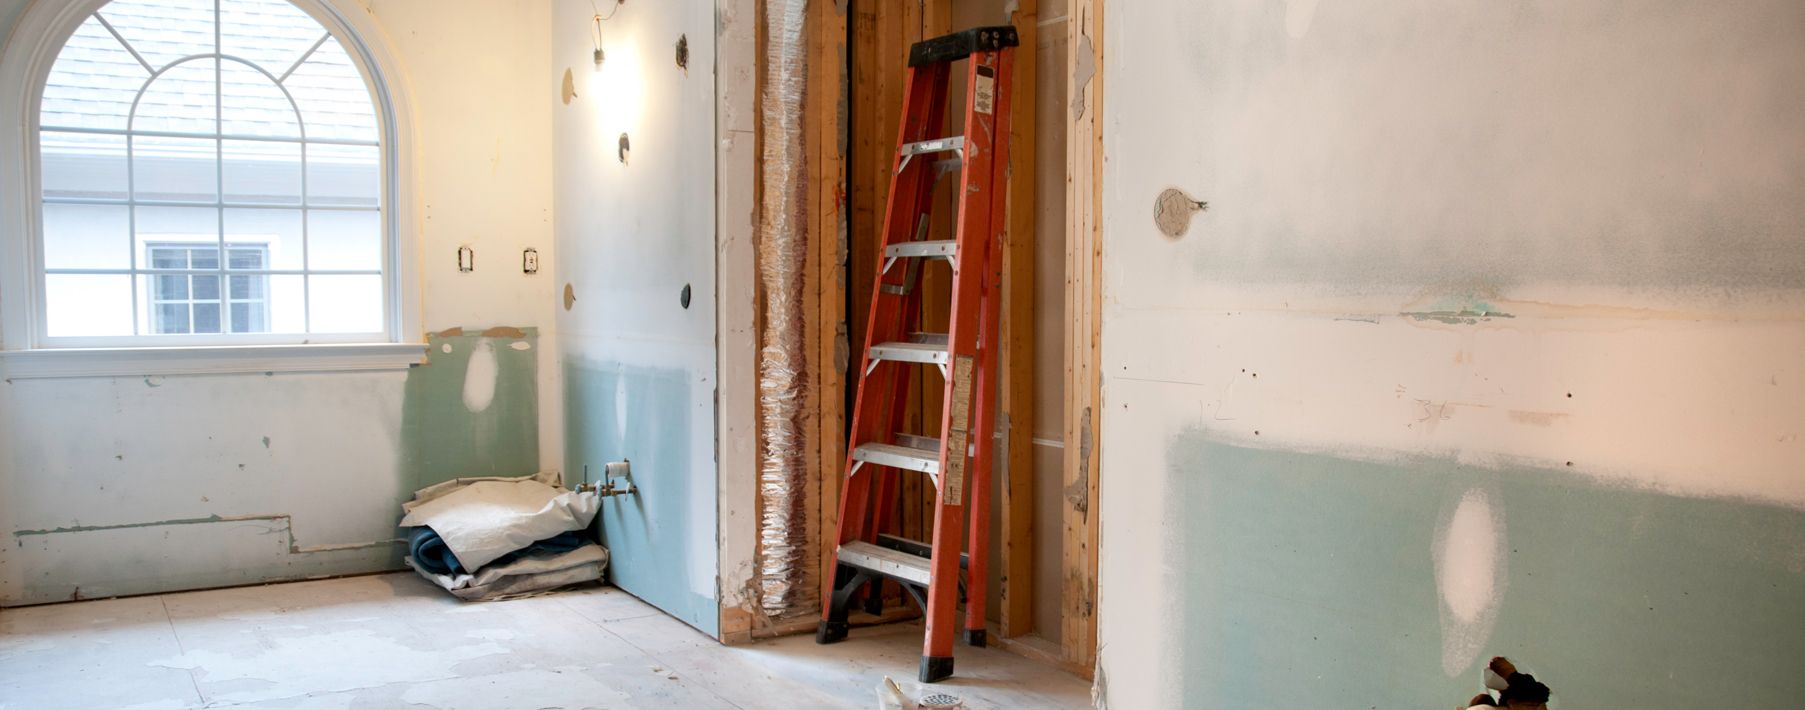 Image of a ladder in an unfinished room with a window